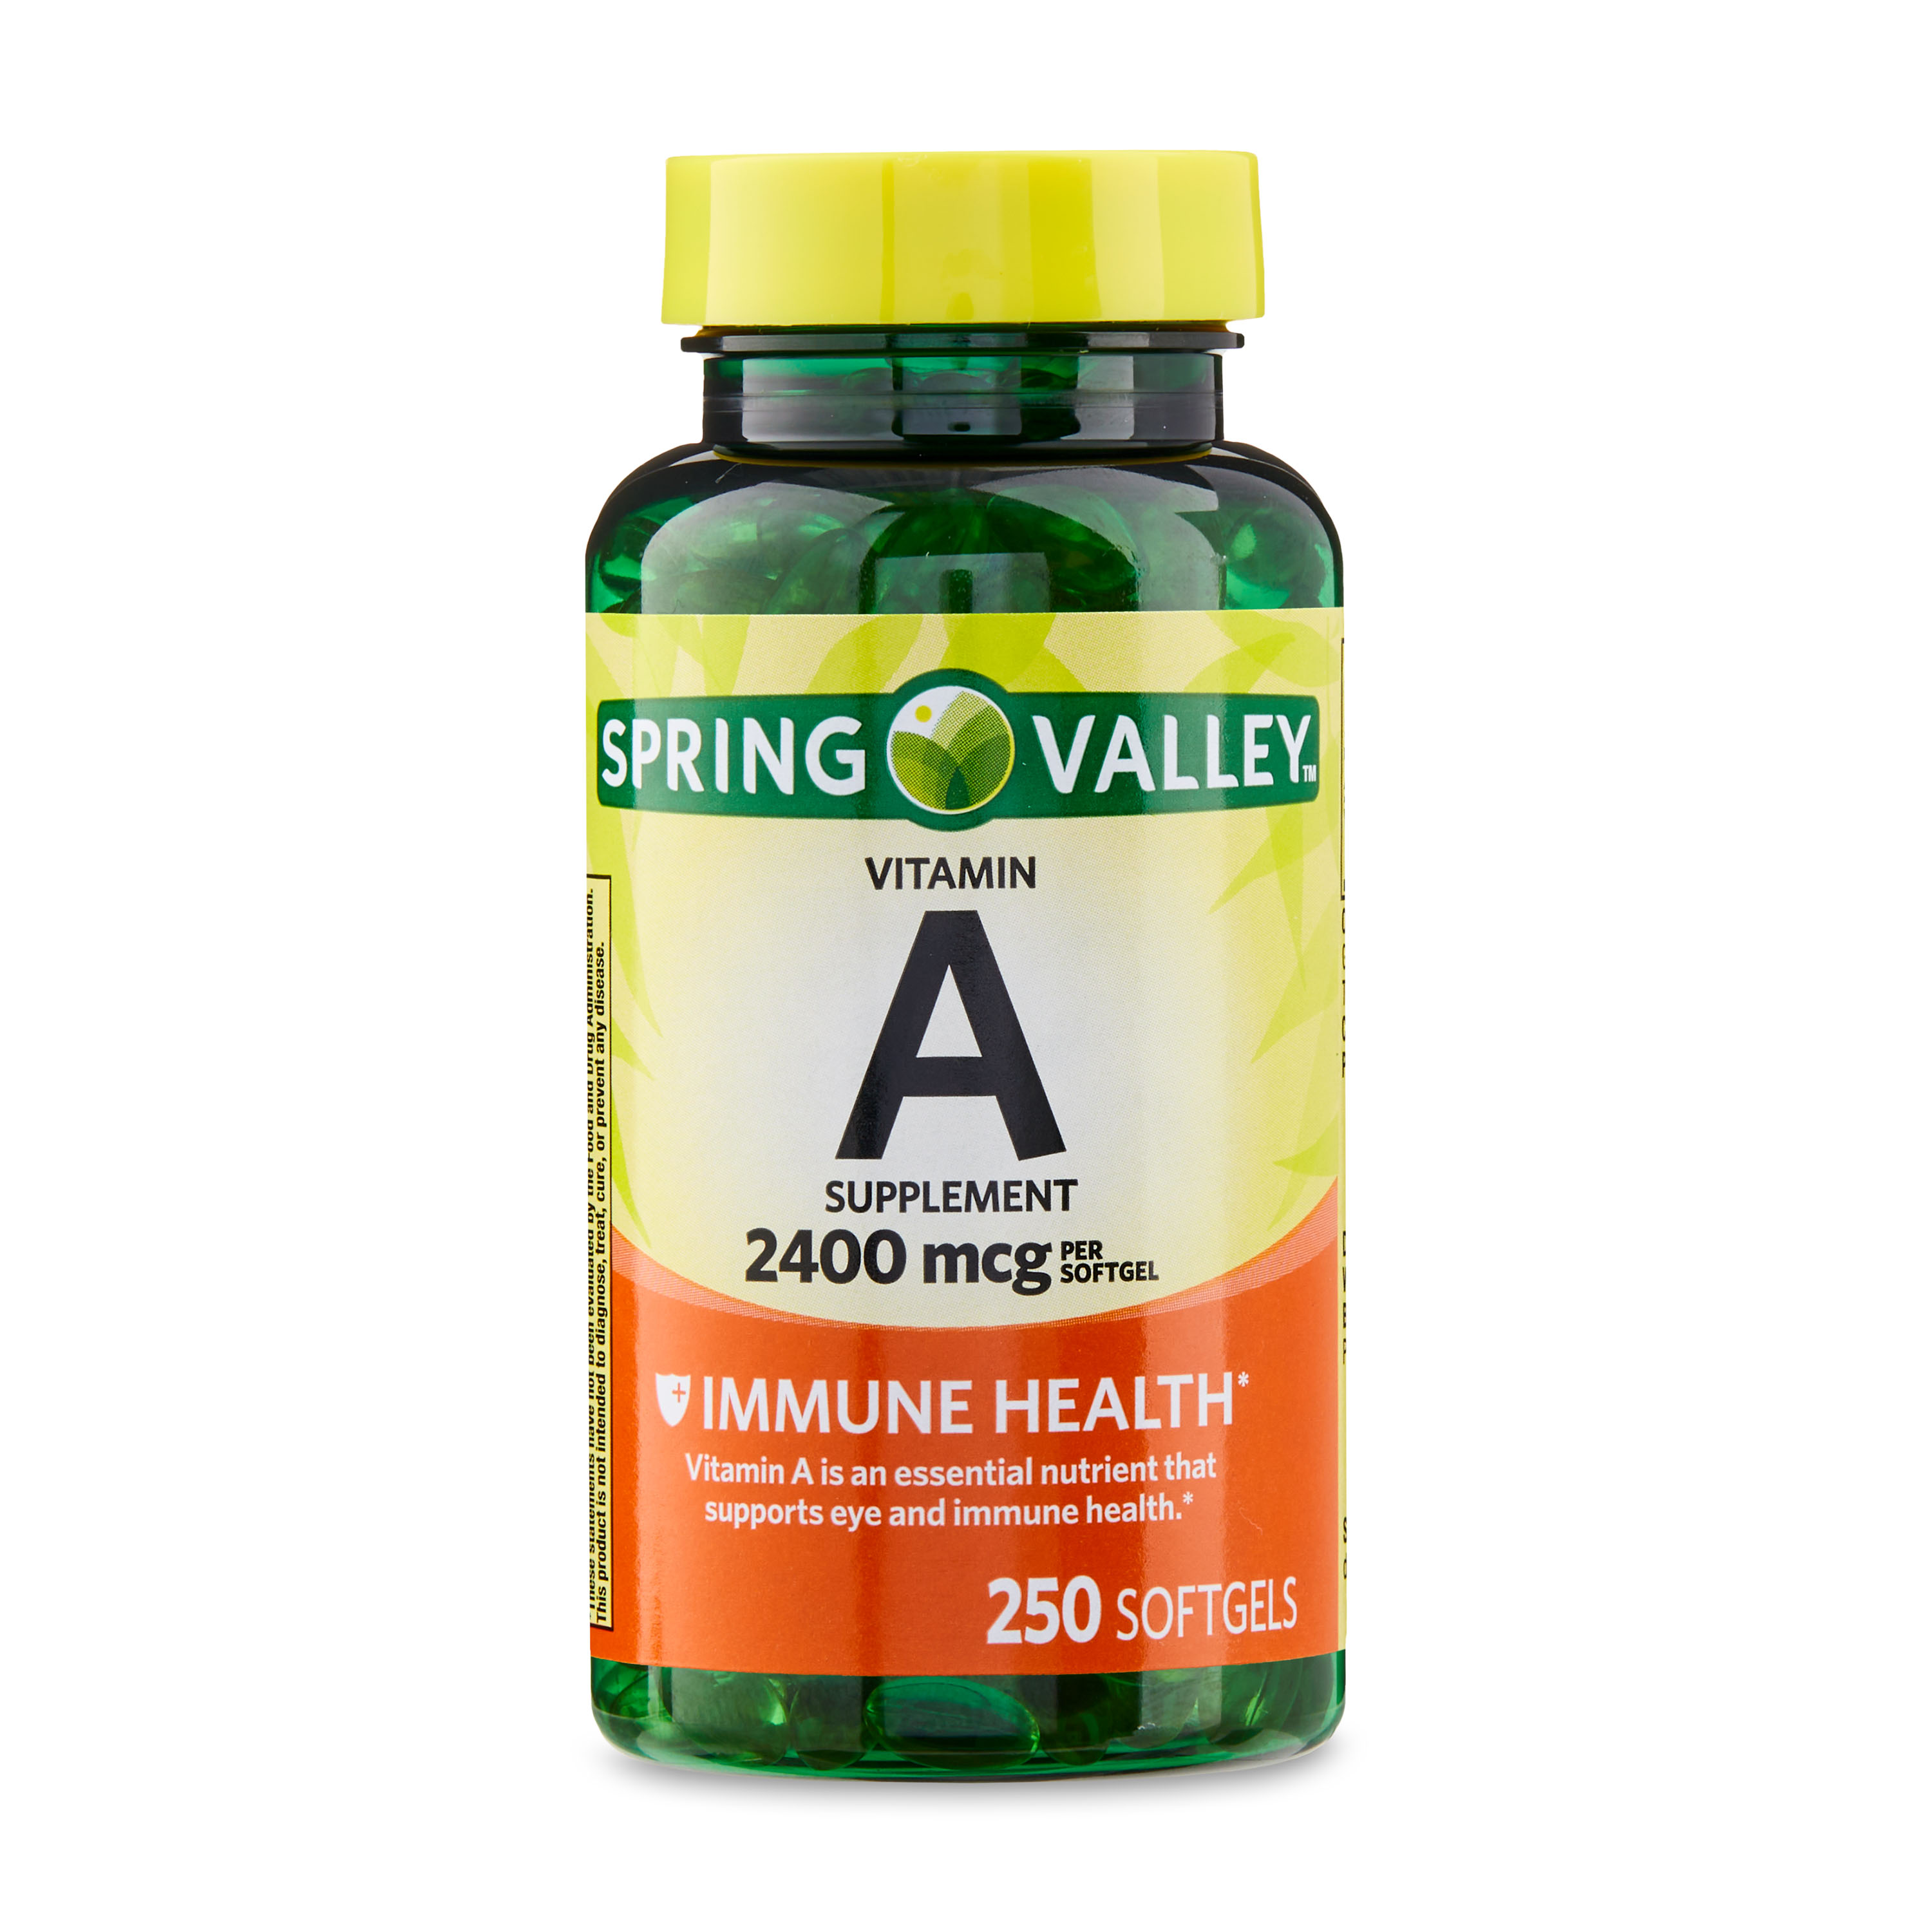 Spring Valley Vitamin A Softgels, 2400 mcg, 250 Count - image 1 of 11